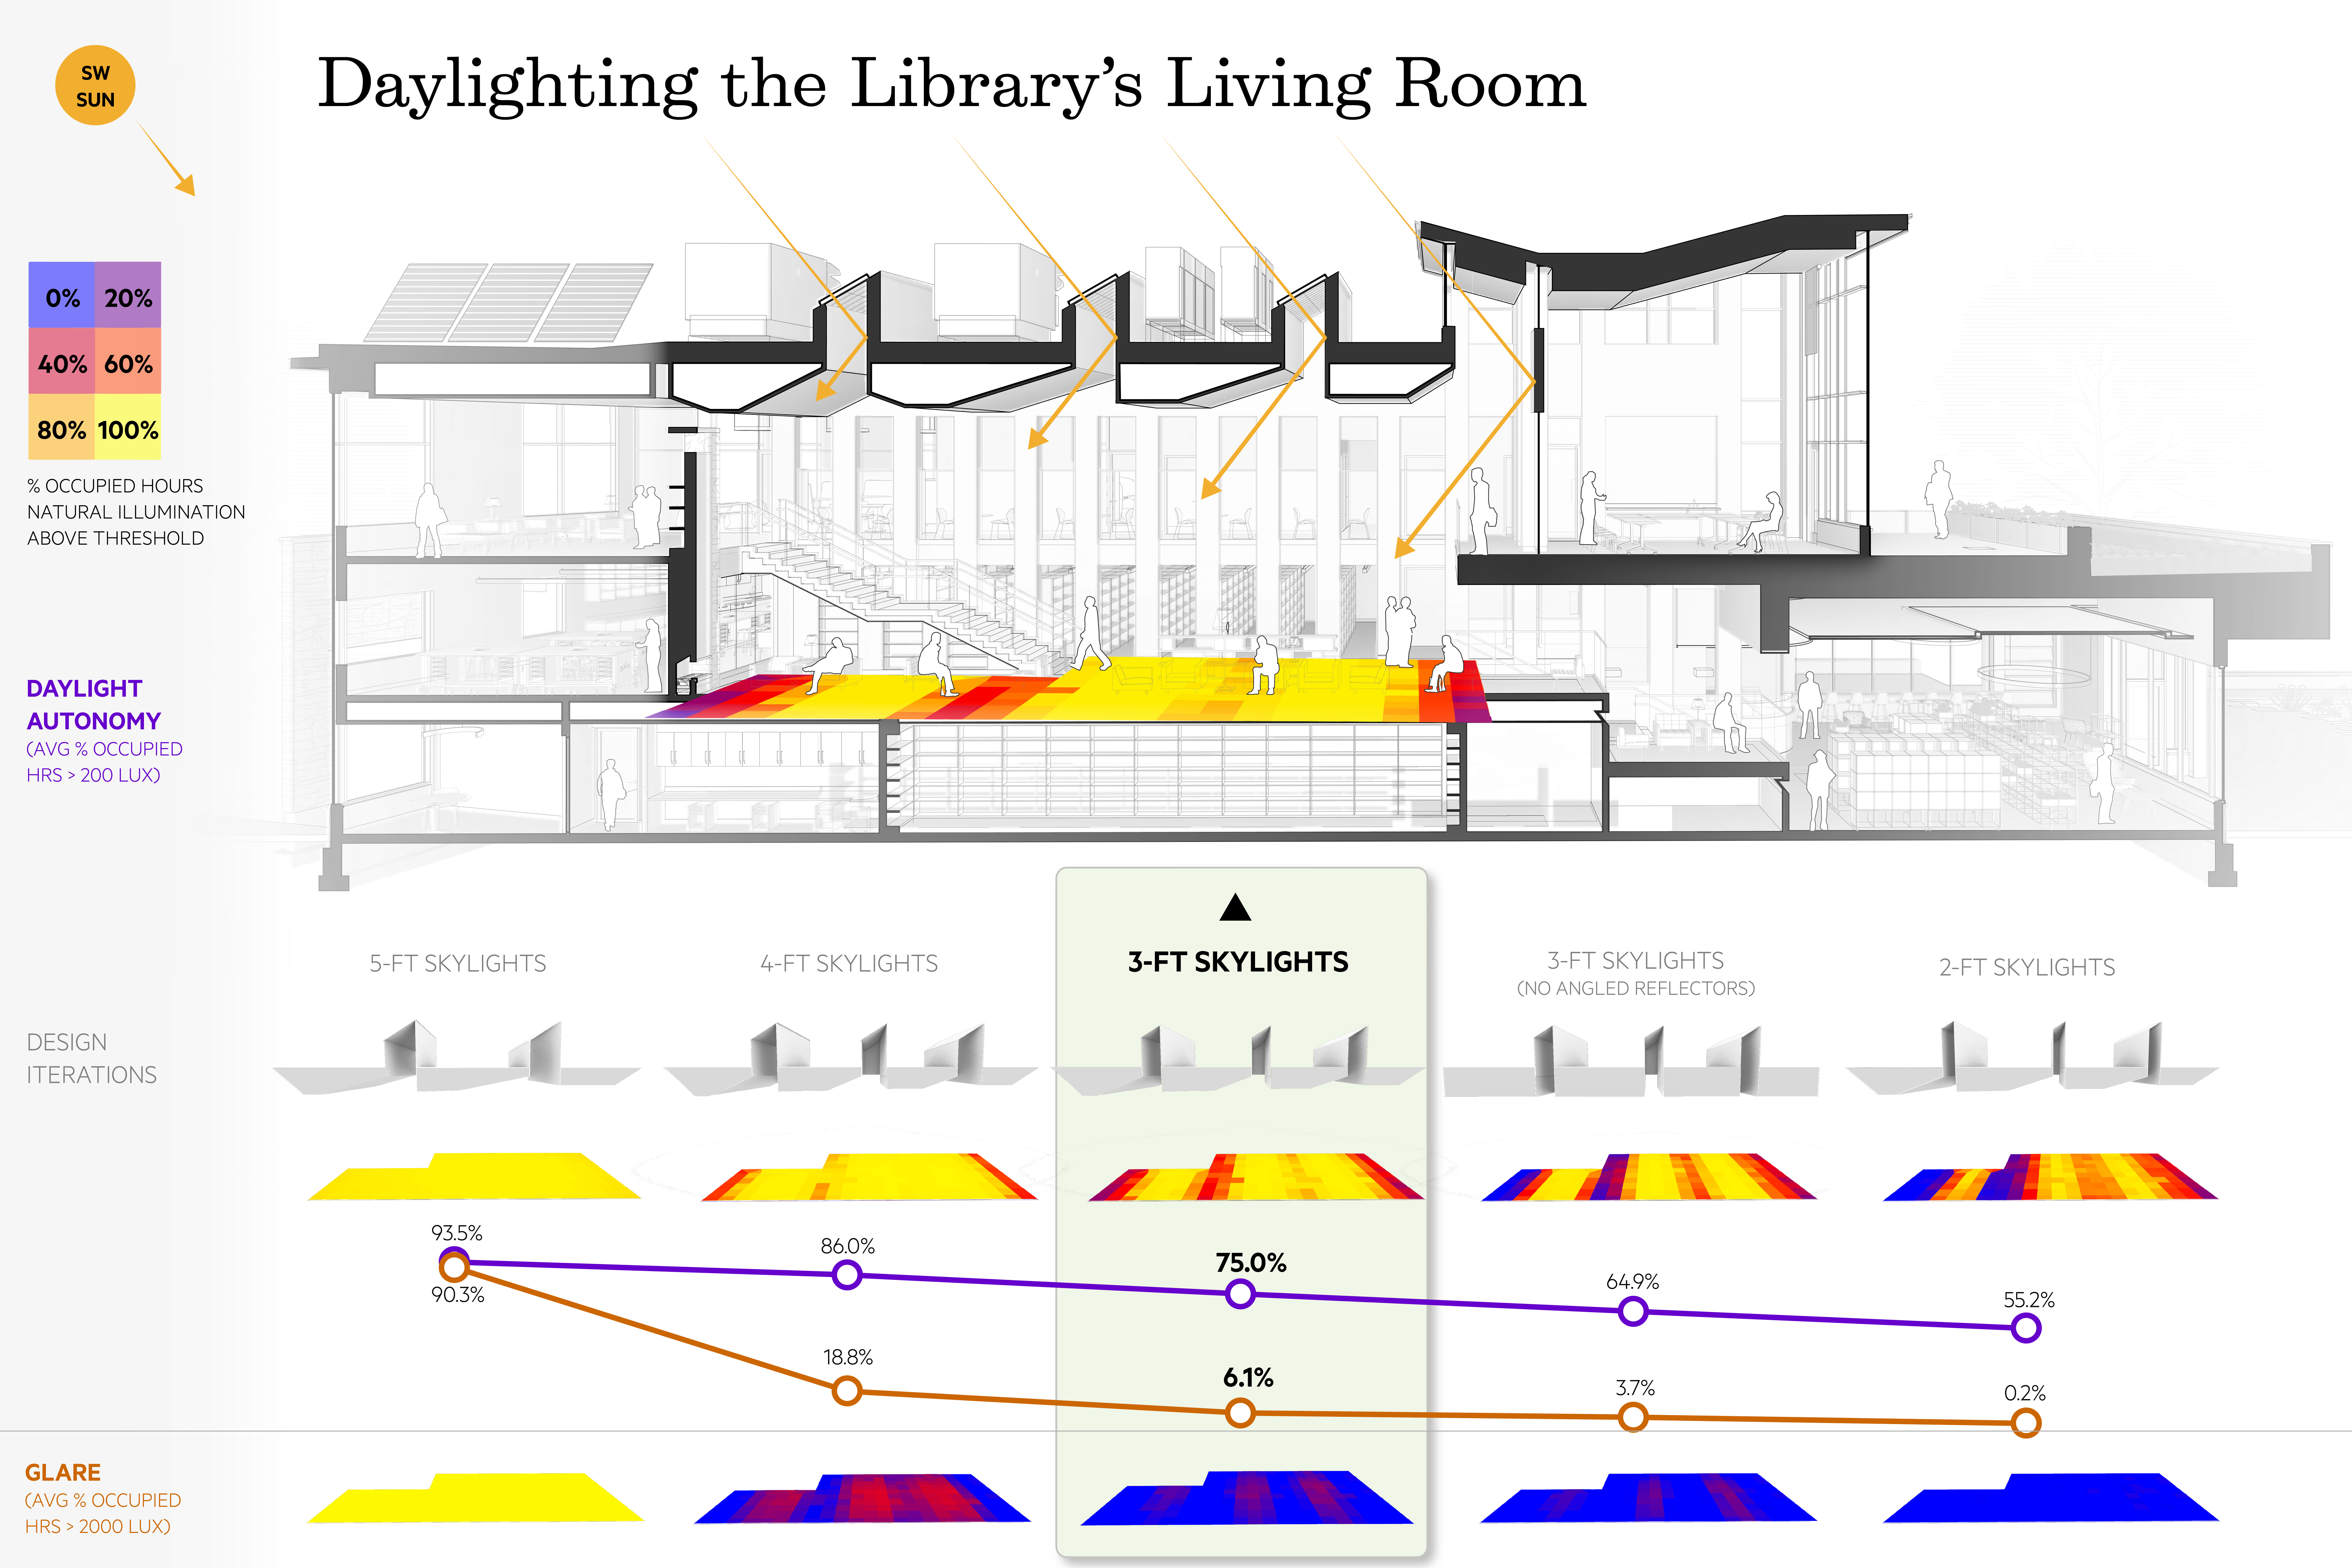 What is the impact of skylight design on daylighting quality? (Competition Winner)